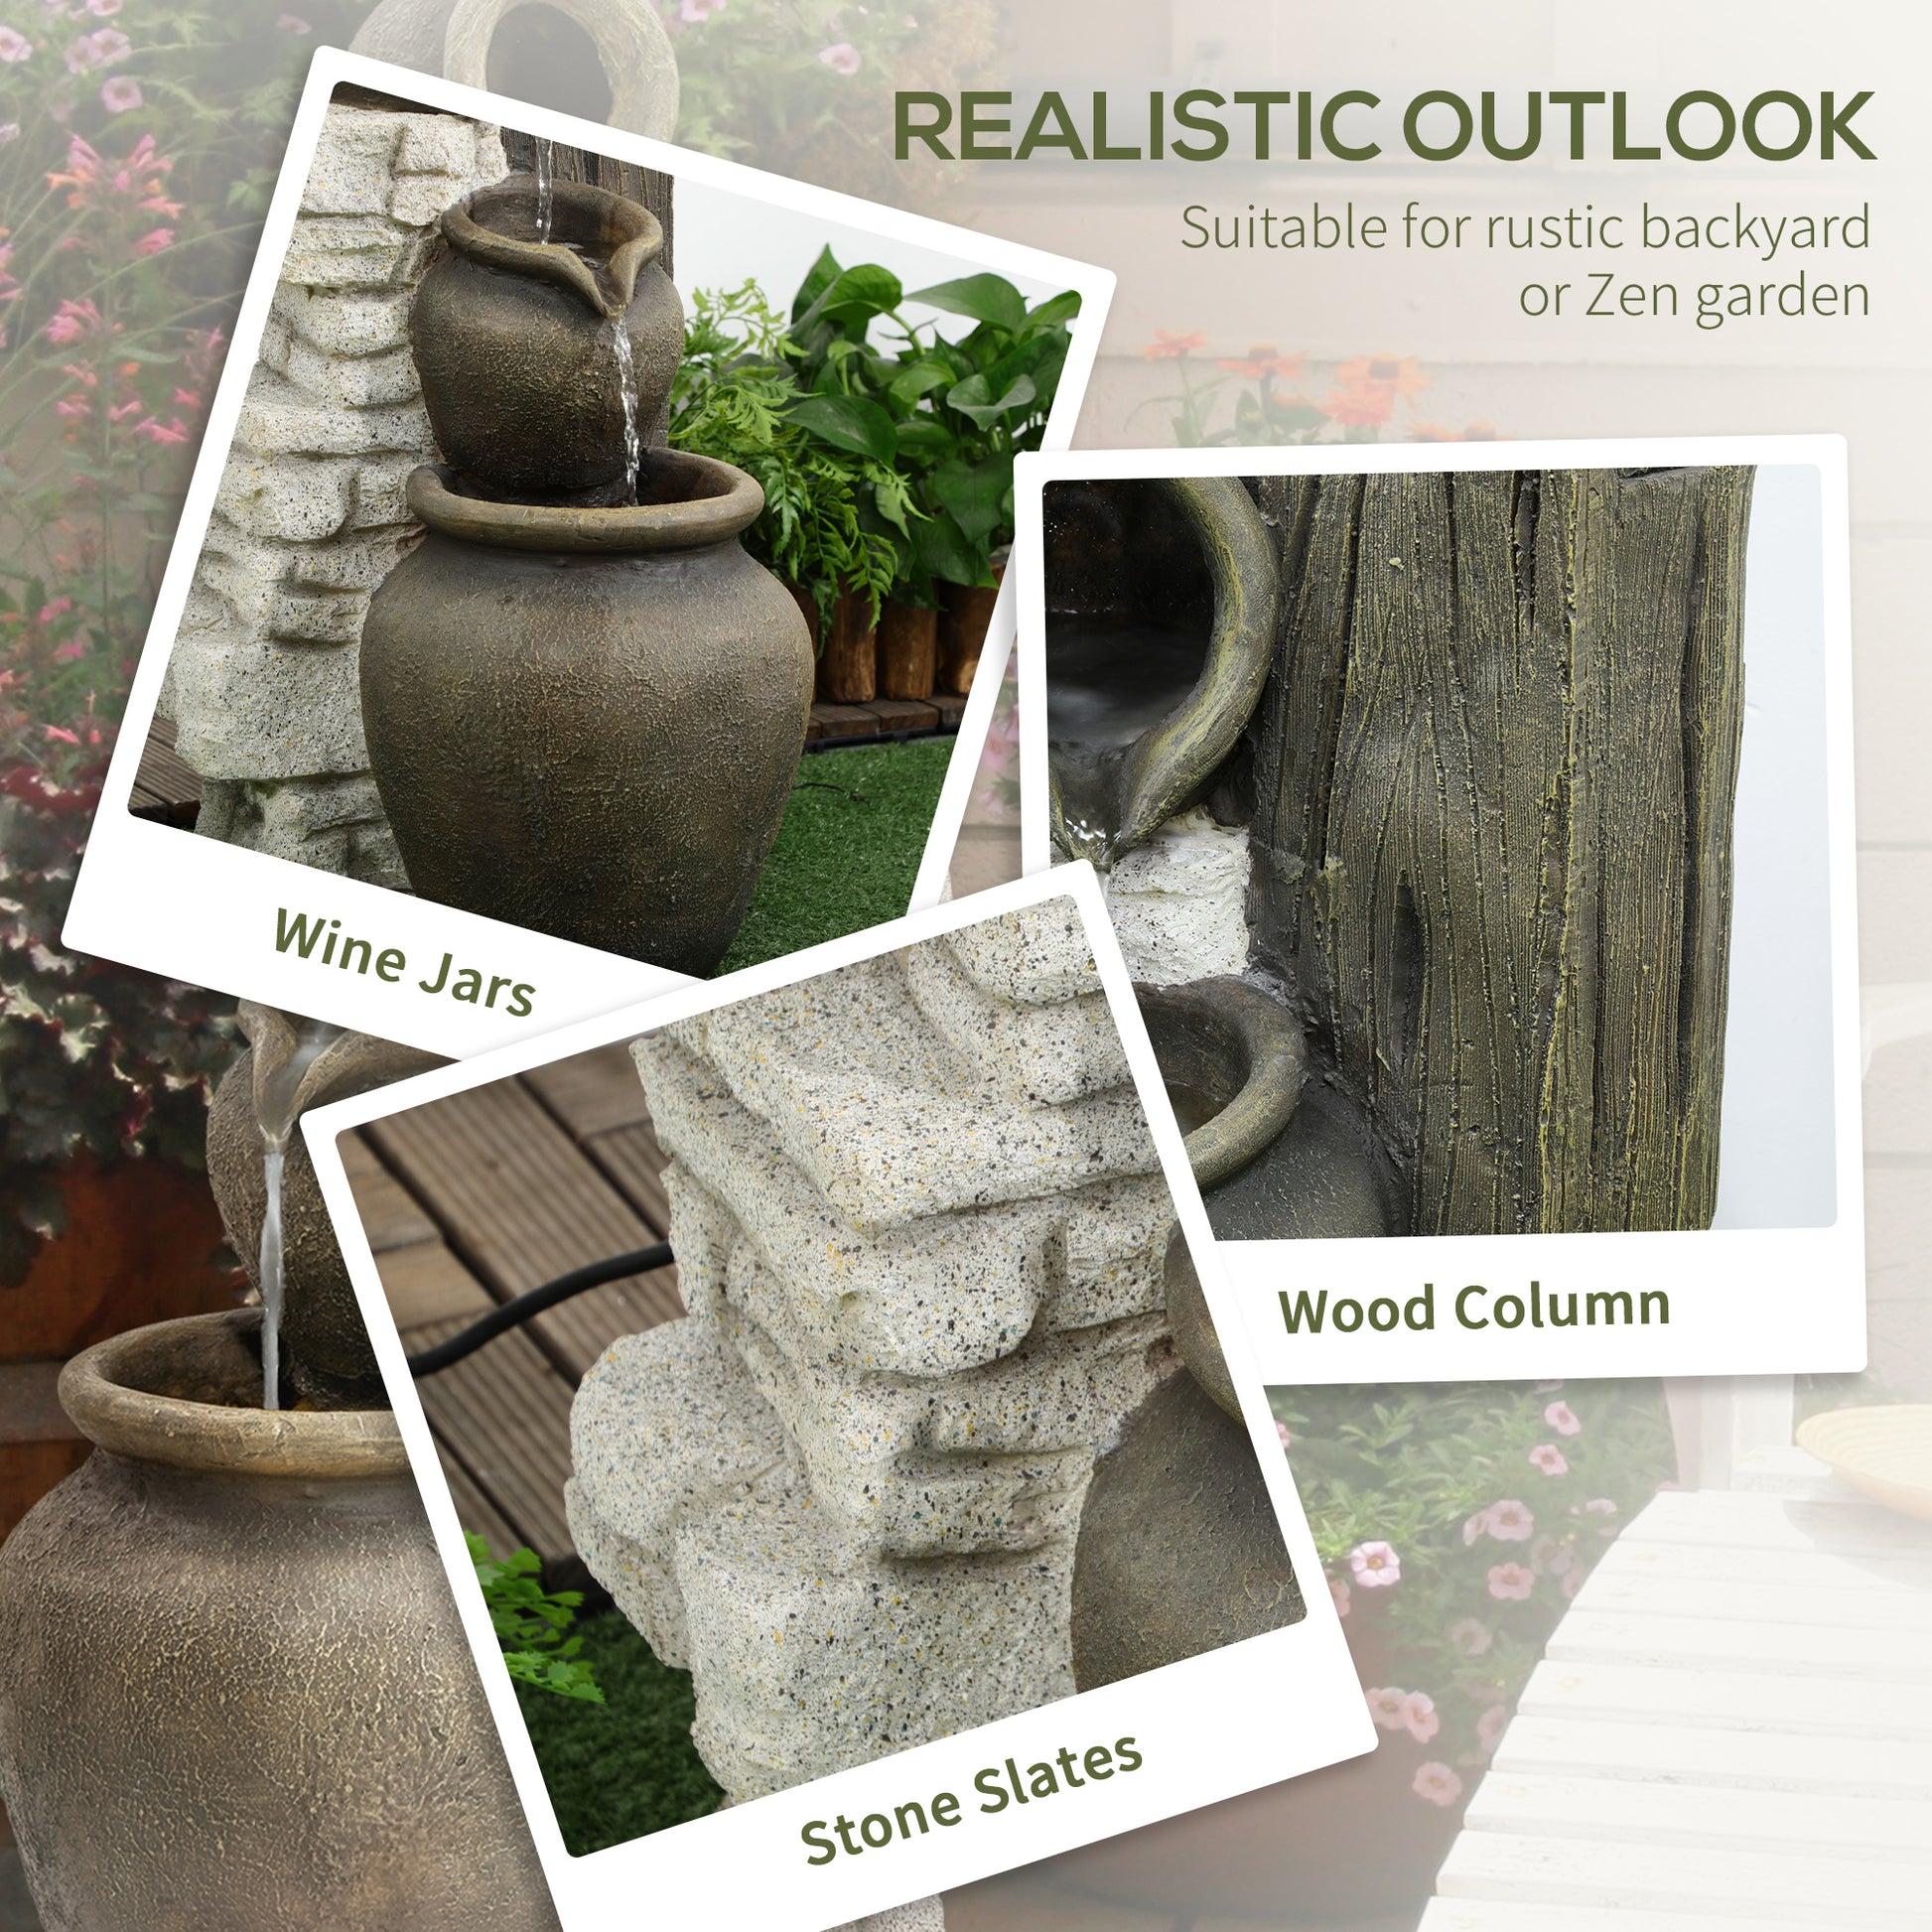 Wine Jars Outdoor Waterfall Fountain with Adjustable Flow, 4-Tier Rustic Resin Cascading Water Fountain, Decorative Backyard Water Feature for Zen Garden, Deck, Porch at Gallery Canada